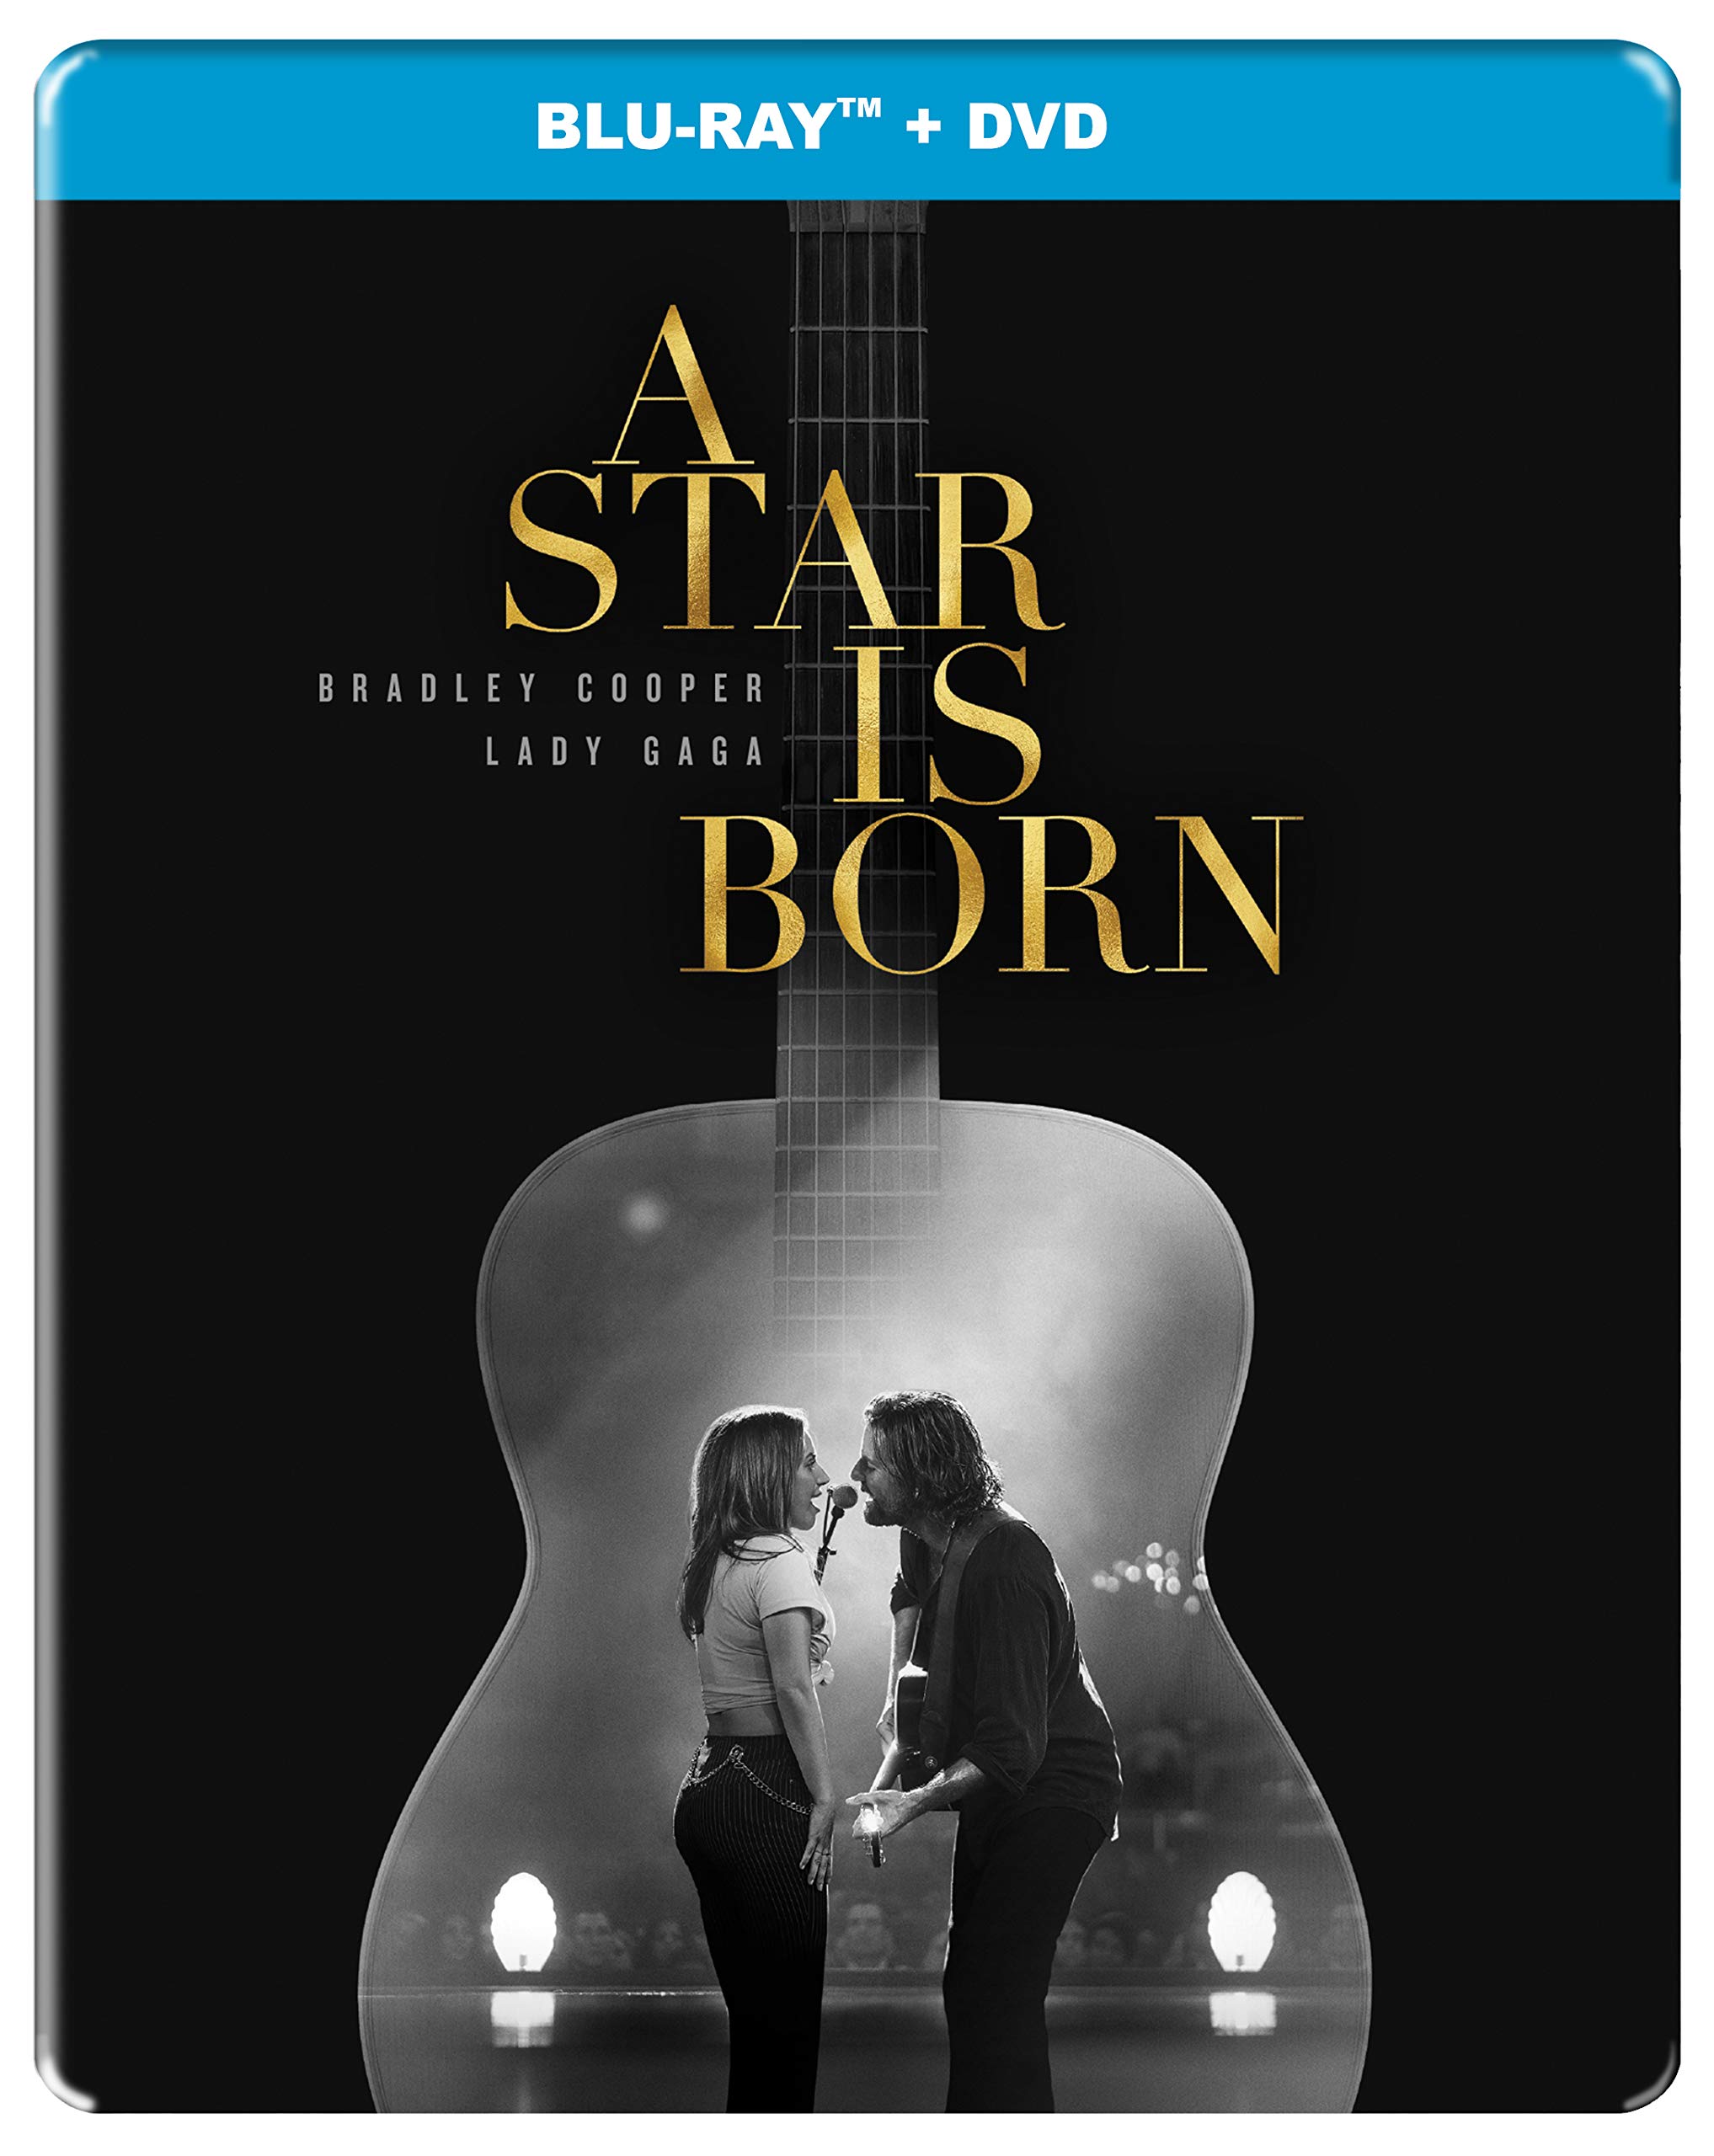 a-star-is-born-2018-steelbook-movie-purchase-or-watch-online